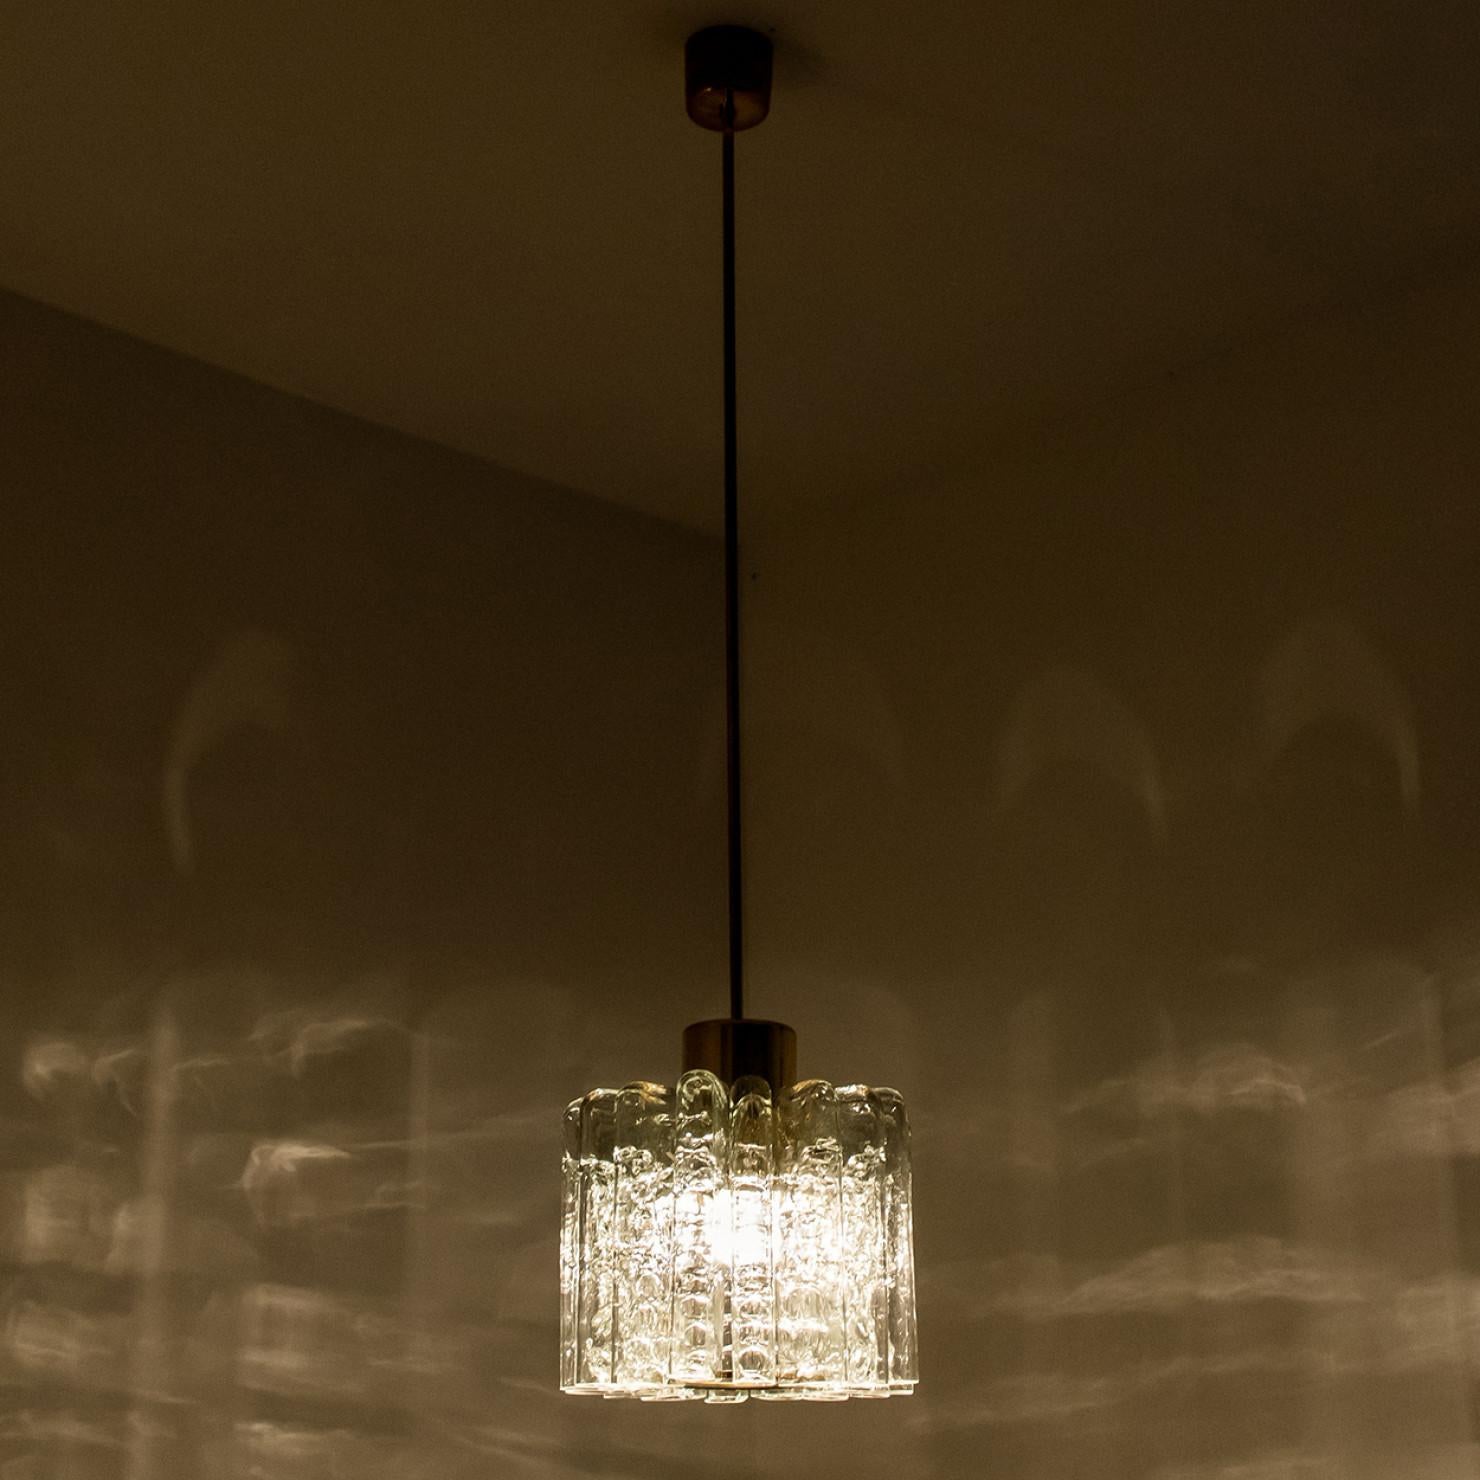 Tulip shaped glass pendant light, manufactured by Doria Leuchten Germany in circa 1960.

This handmade pendant consists of a brass rod with an array of textured round tube-shaped glass rods. Due the combination of materials, opal and clear glass,